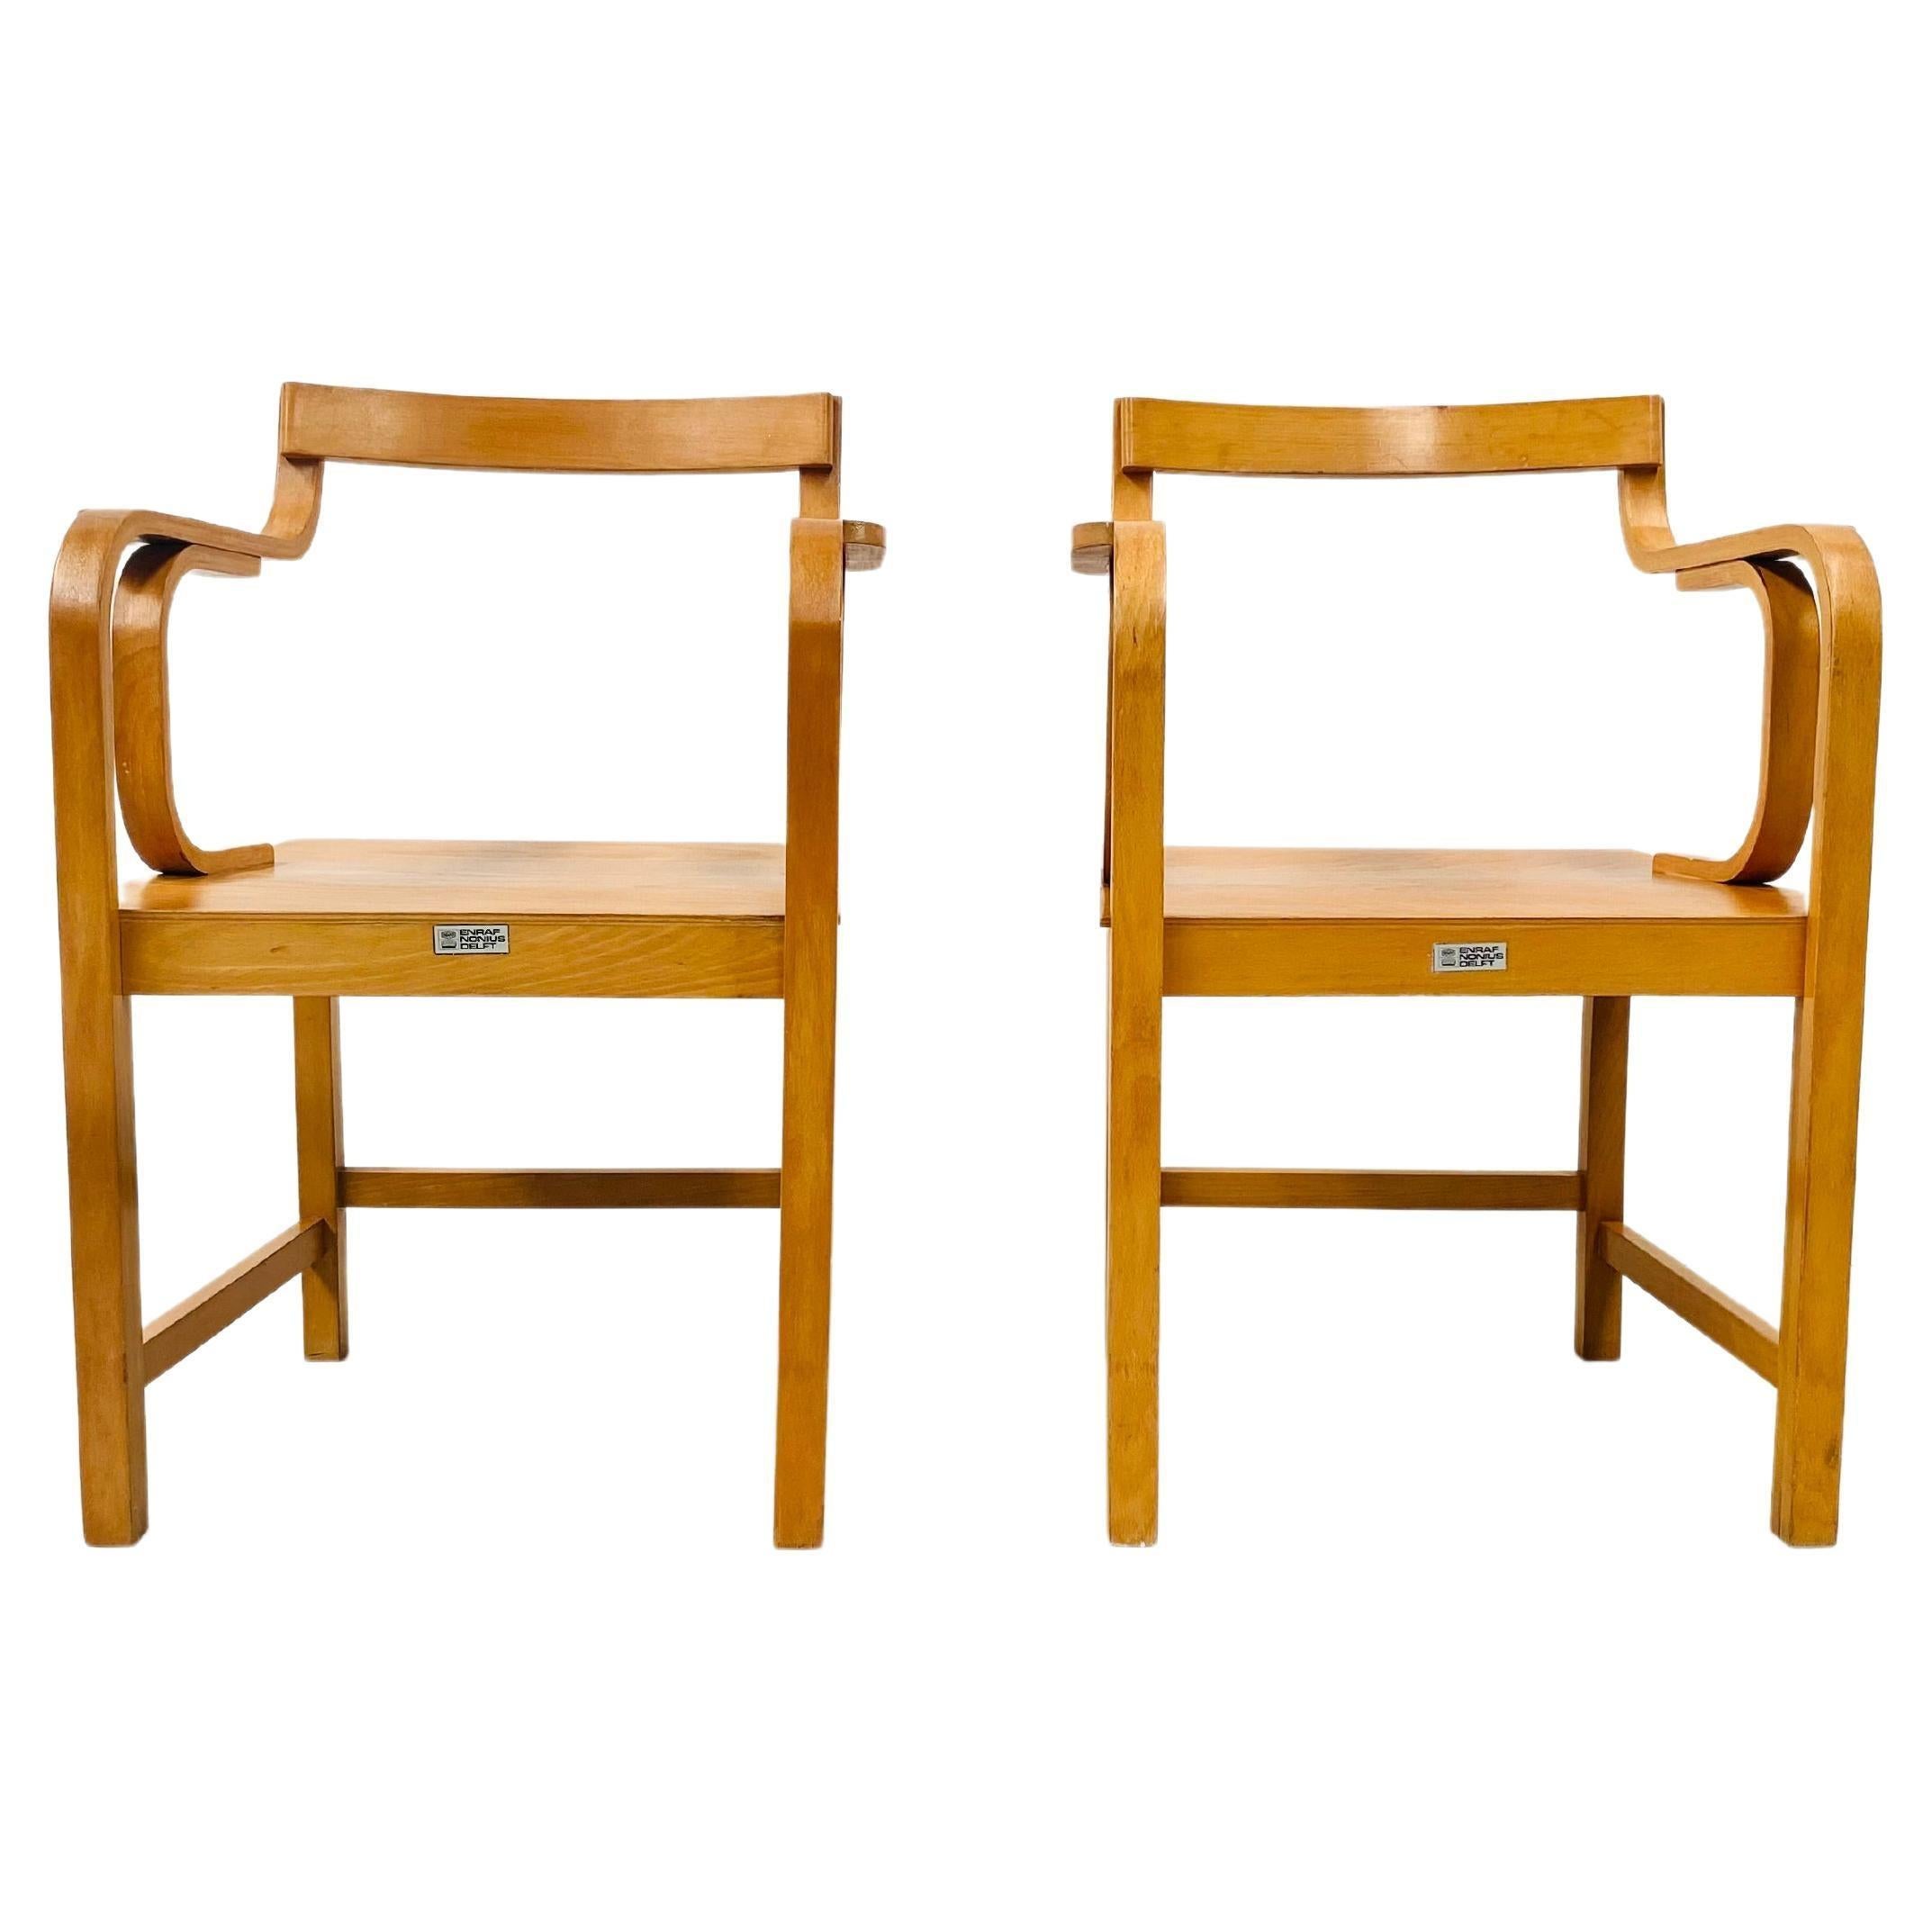 Vintage Dutch Plywood Beech Armchairs by Enraf Nonius Delft, 1970s For Sale 3